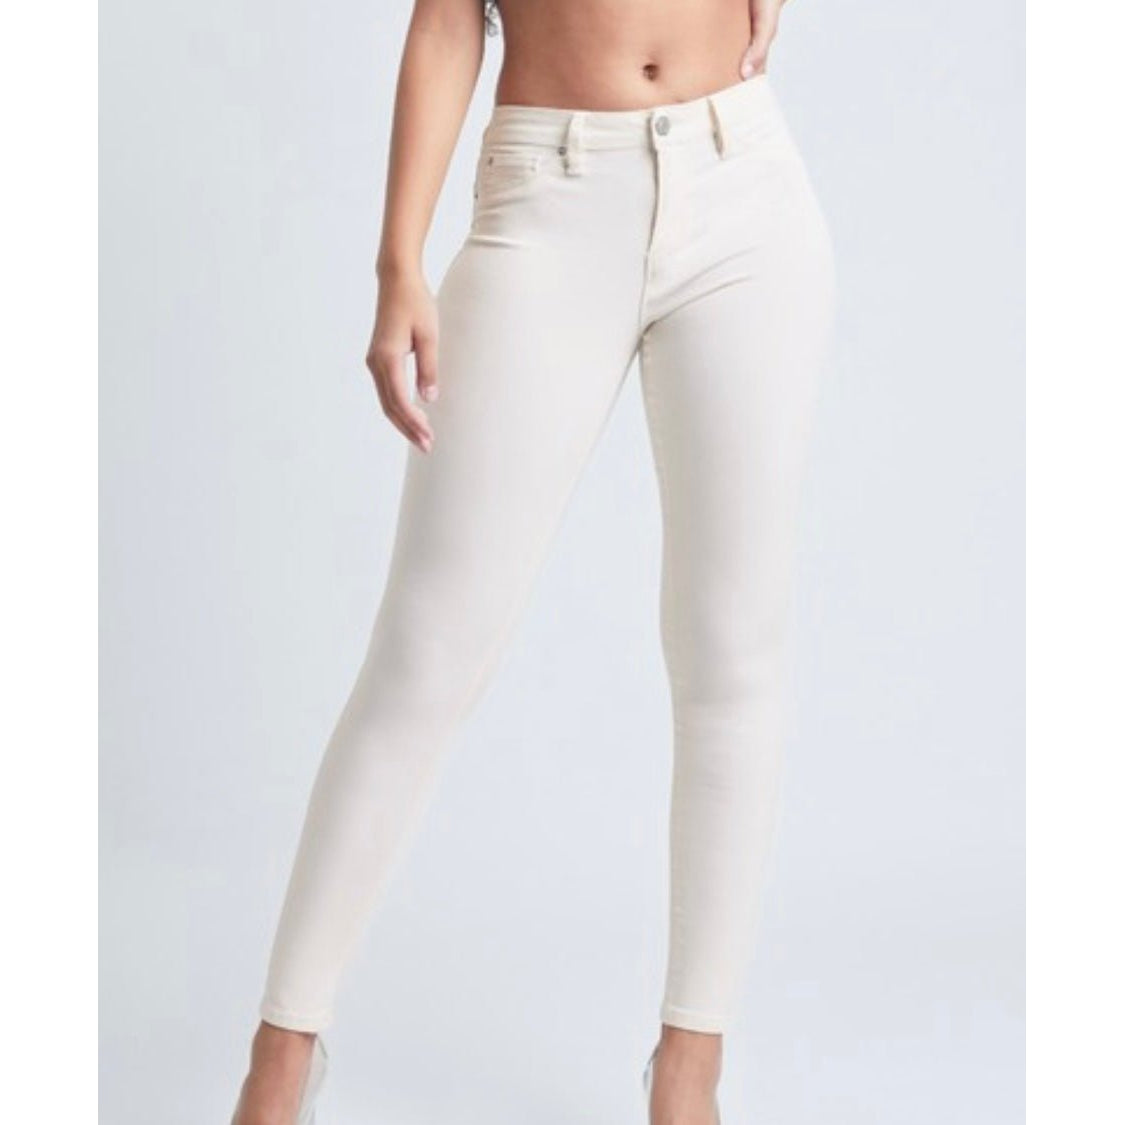 Cassie Mid-Rise Skinny - Available in 6 Colors